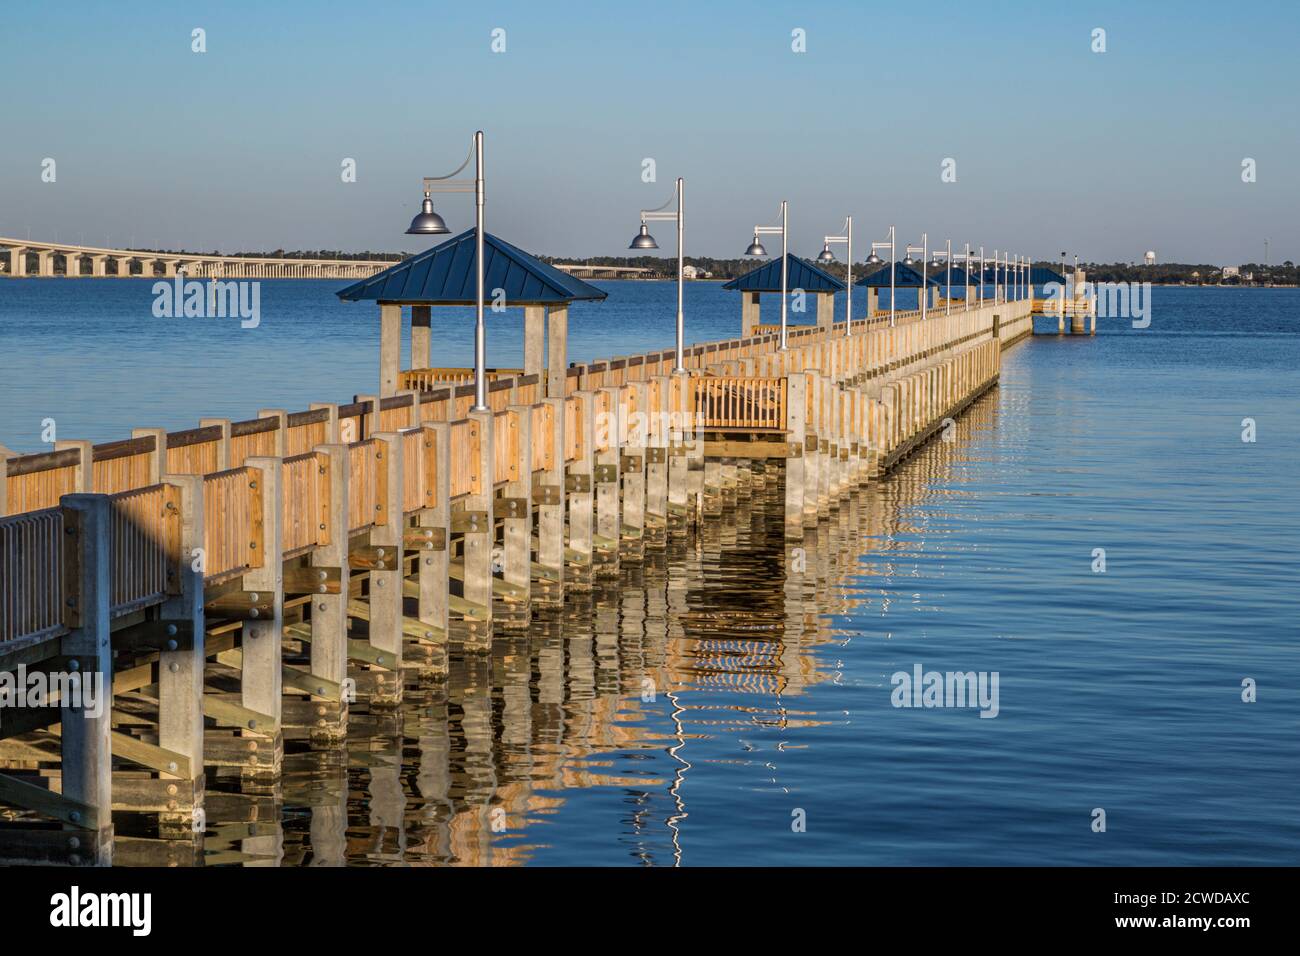 Pier at the harbor in Bay St. Louis, Mississippi, USA Stock Photo